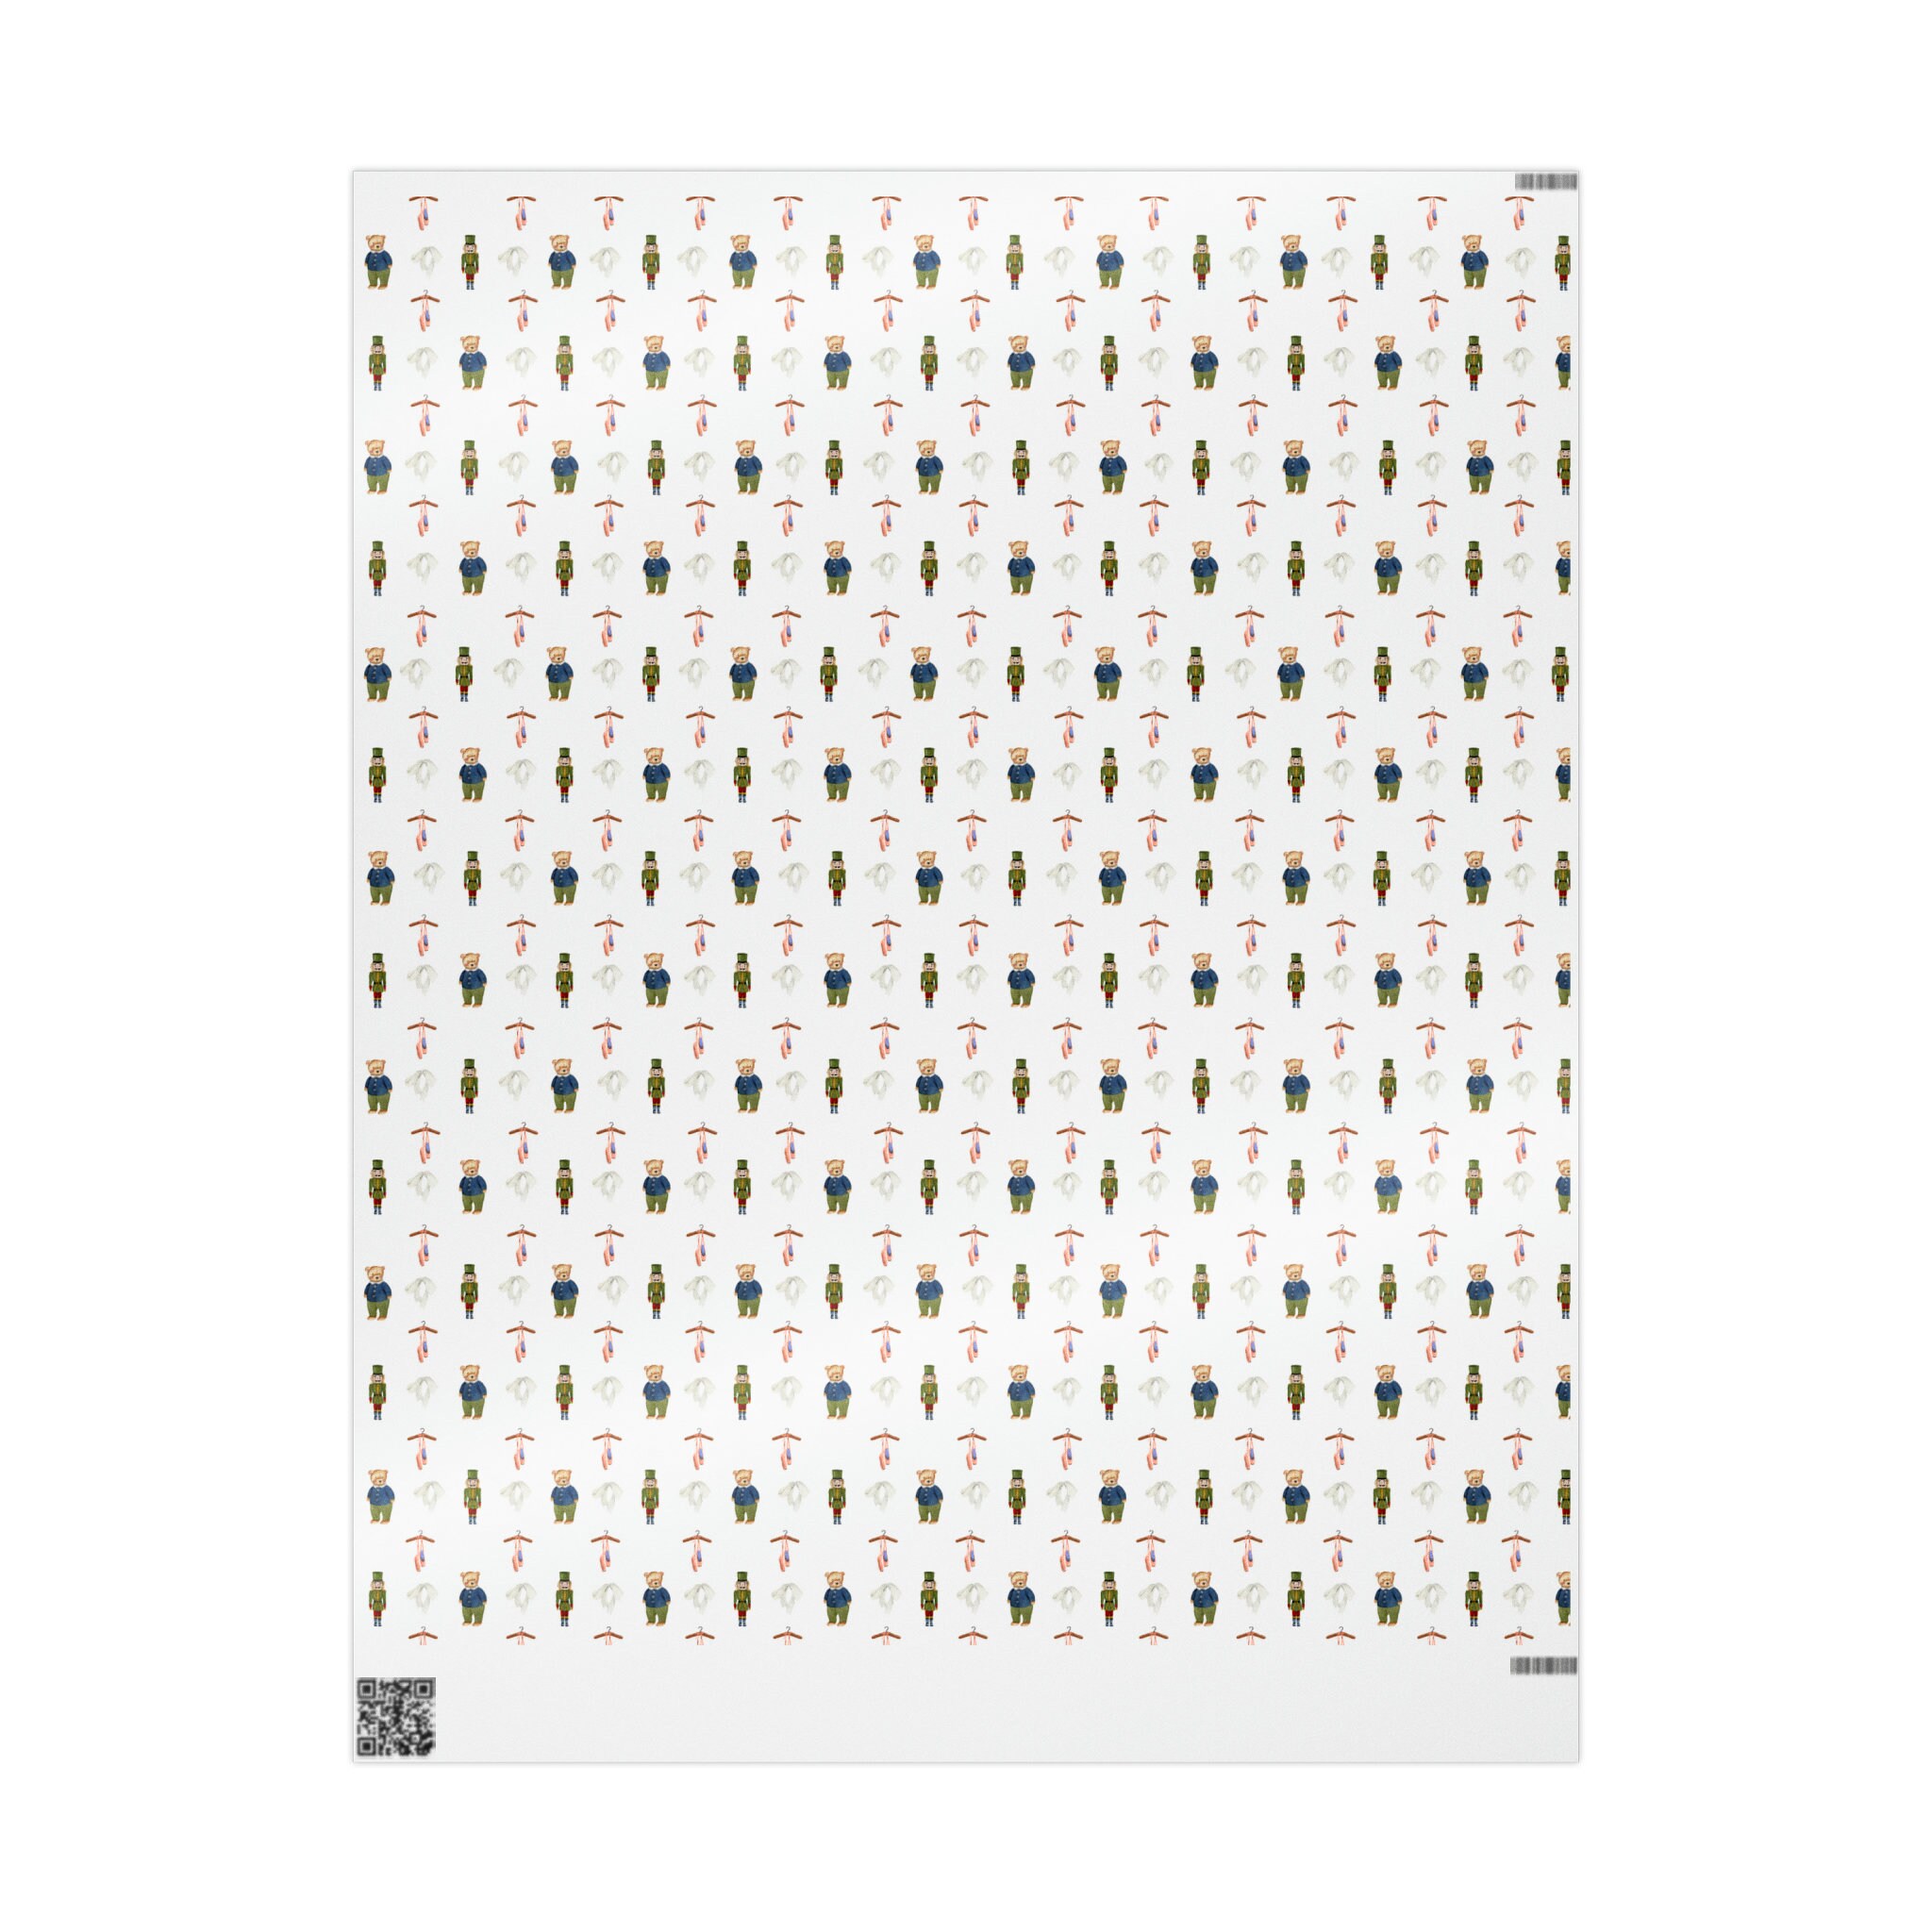 Ralph Lauren Inspired Beige Wrapping Paper, Wrapping Paper Patterns,  Wrapping Paper Christmas, Gift Wrap Winter Wrapping Paper 